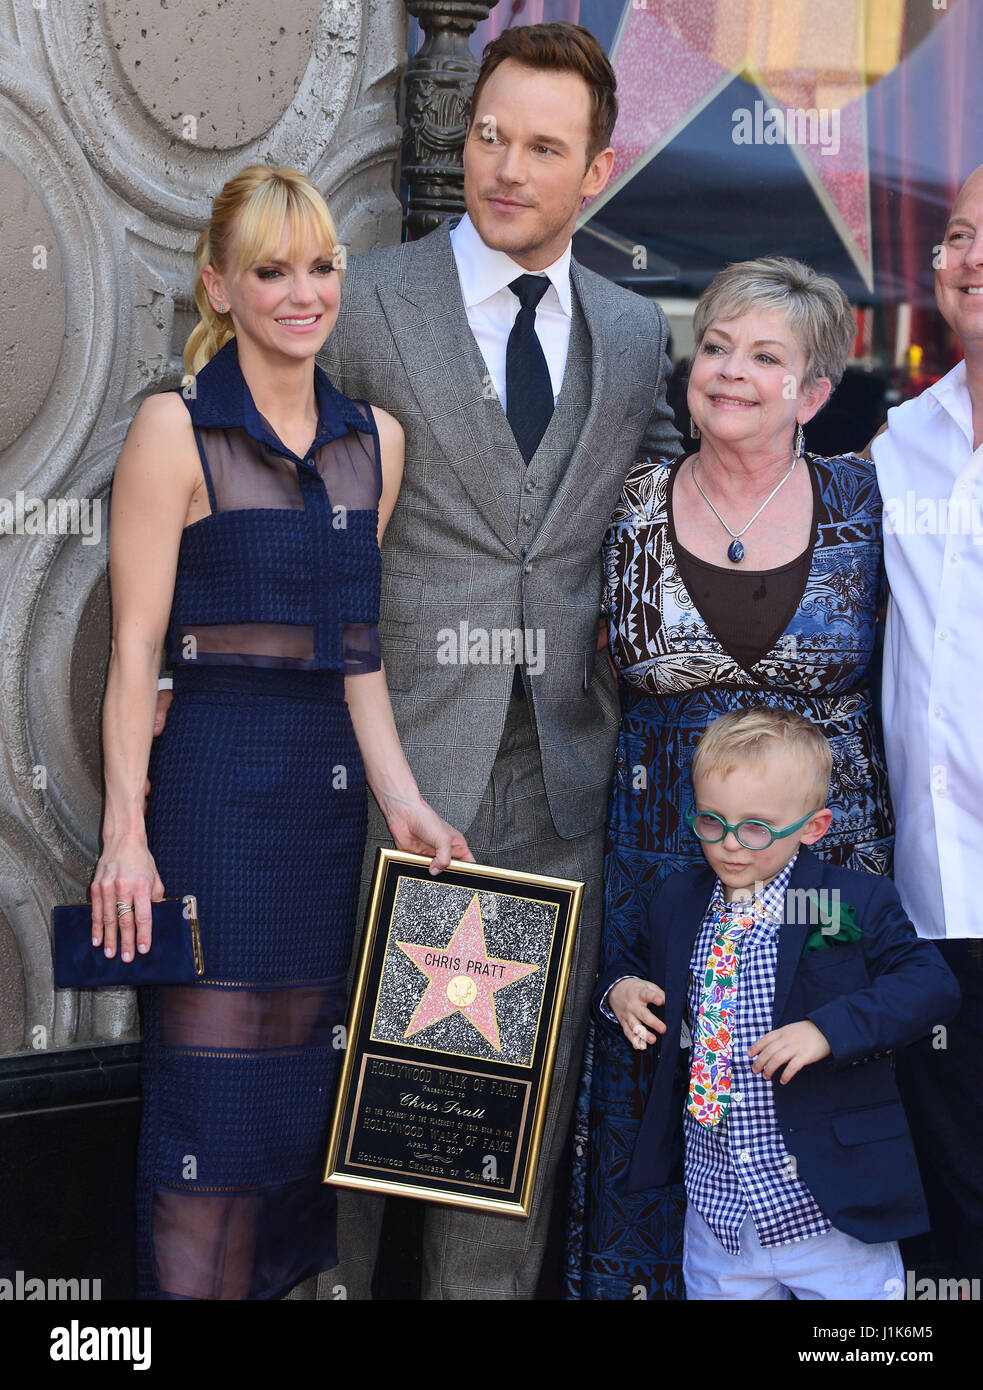 Chris Pratt Star 050 Anna faris, son Jack and family at the Chris Pratt Star ceremony on the Hollywood Walk of Fame in Los Angeles. April 21, 2017 Stock Photo